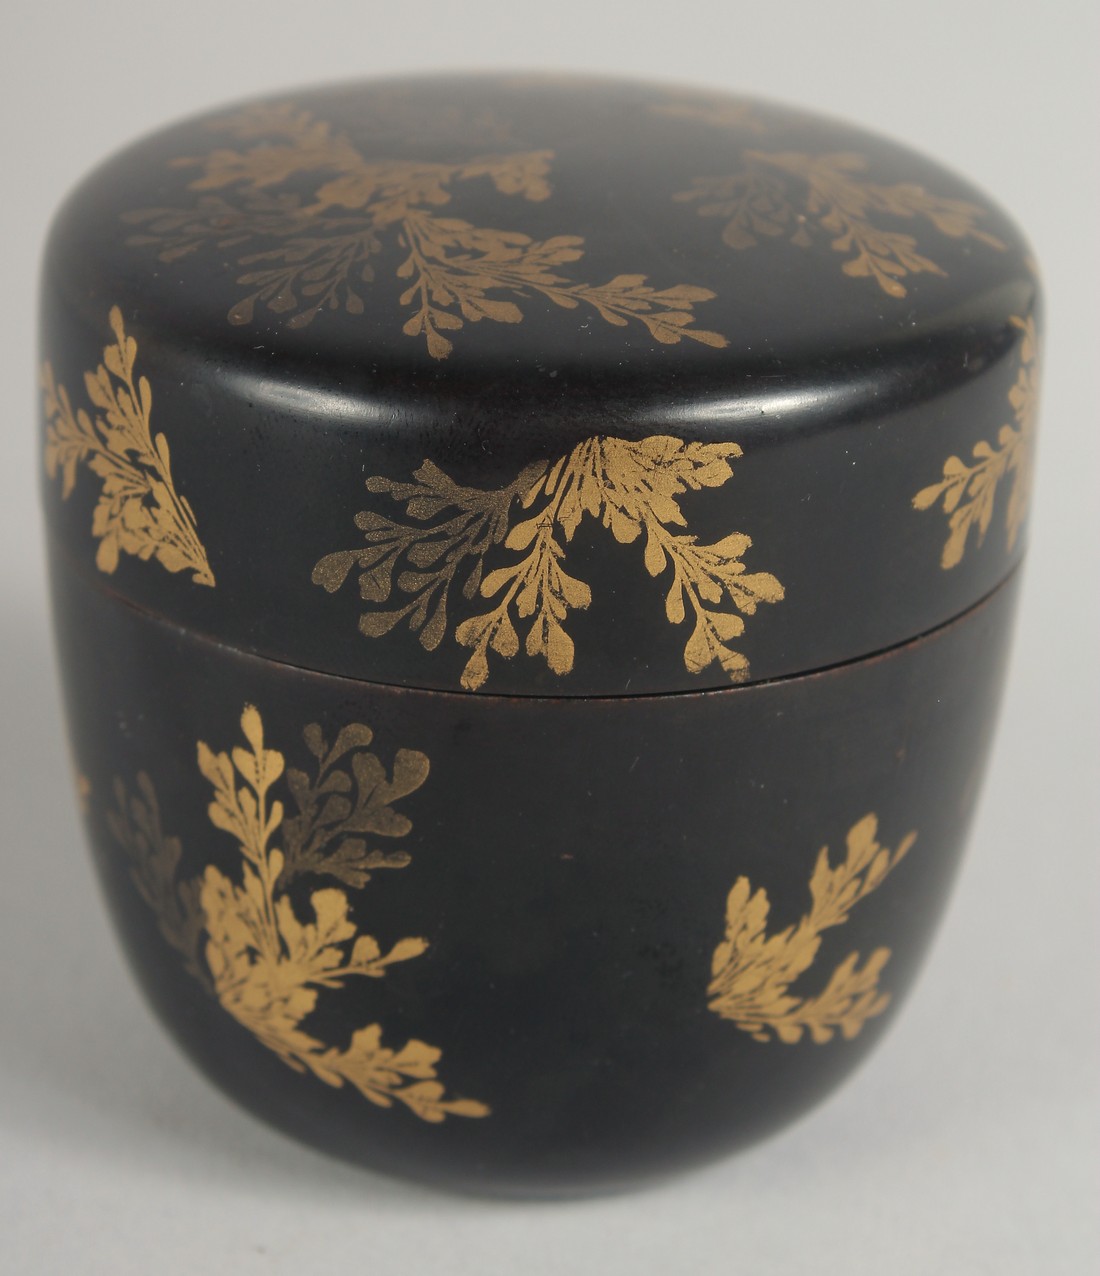 A JAPANESE LACQUER NATSUME / TEA CADDY, decorated with gold foliage, 6cm high. - Image 2 of 4